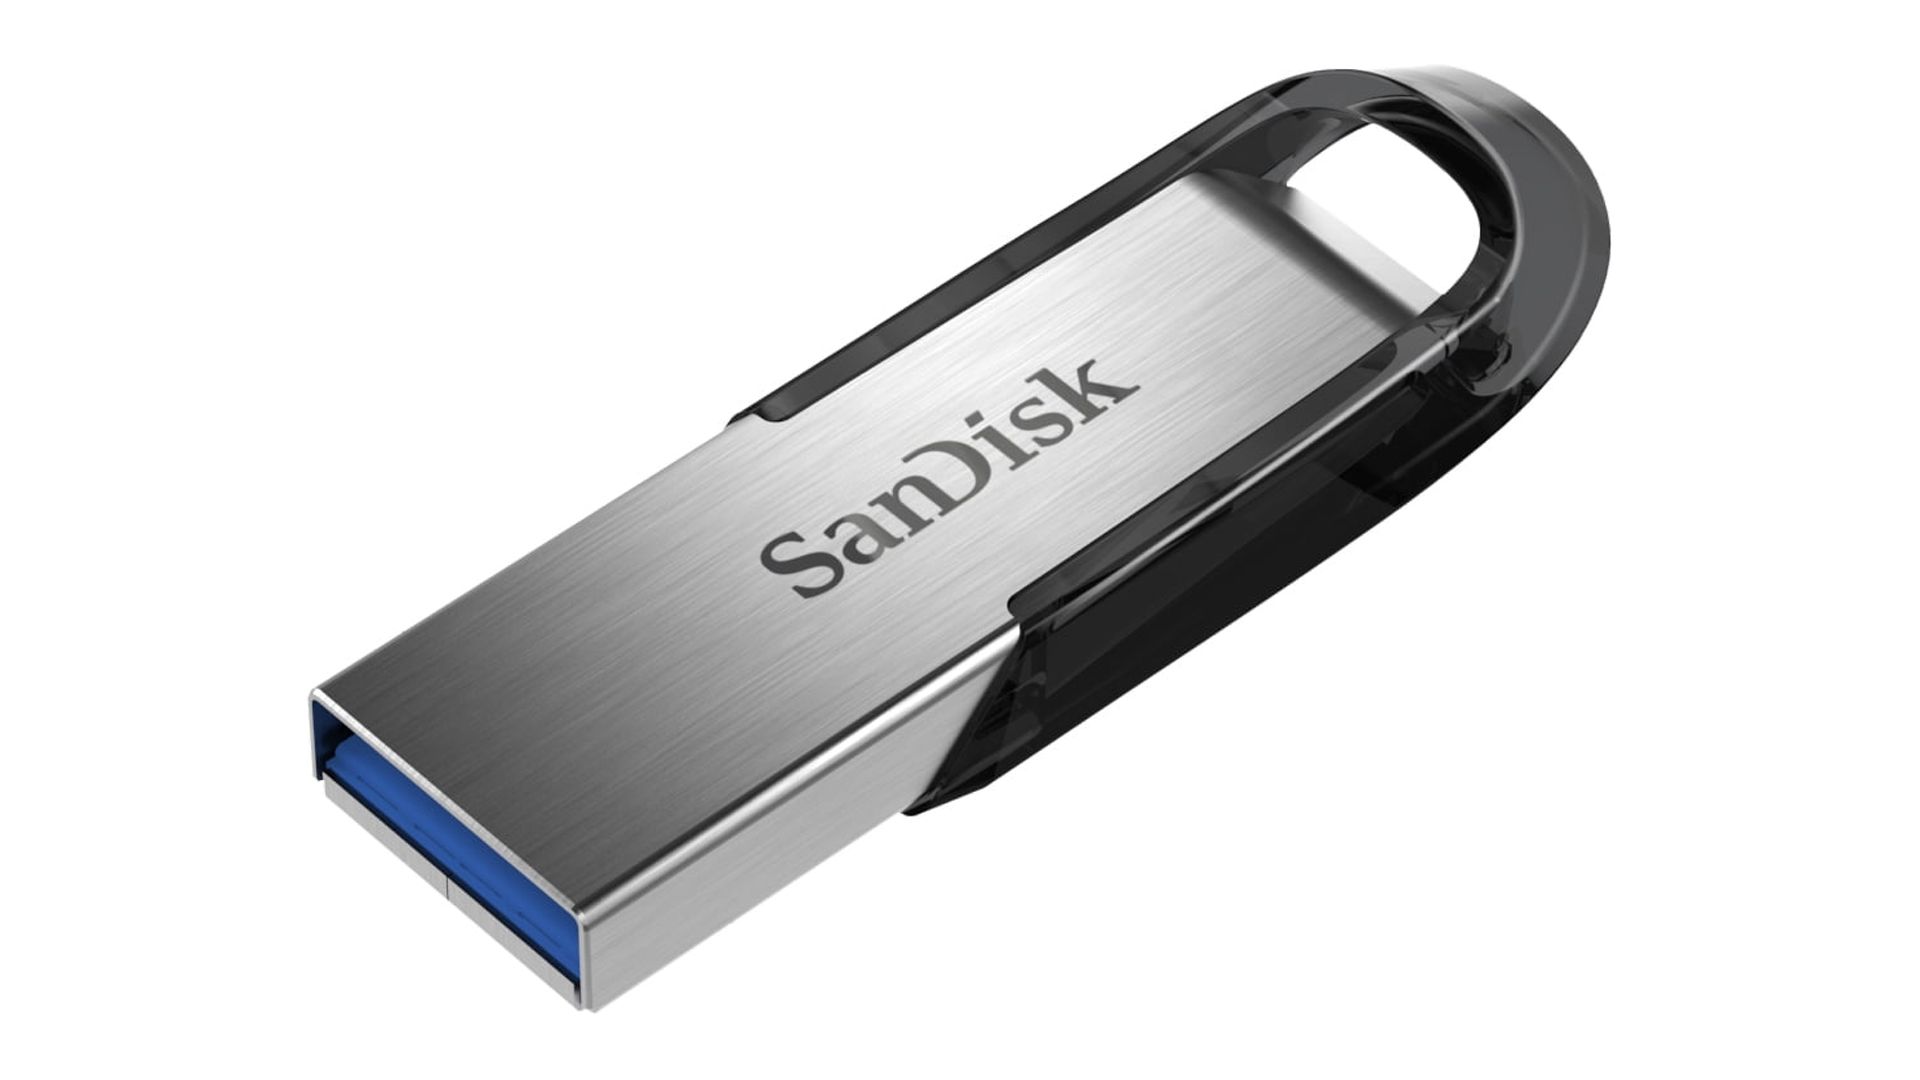 SanDisk 128GB Ultra Flair USB 3.0 Flash Drive - SDCZ73-128G-AW46 - image 2 of 10